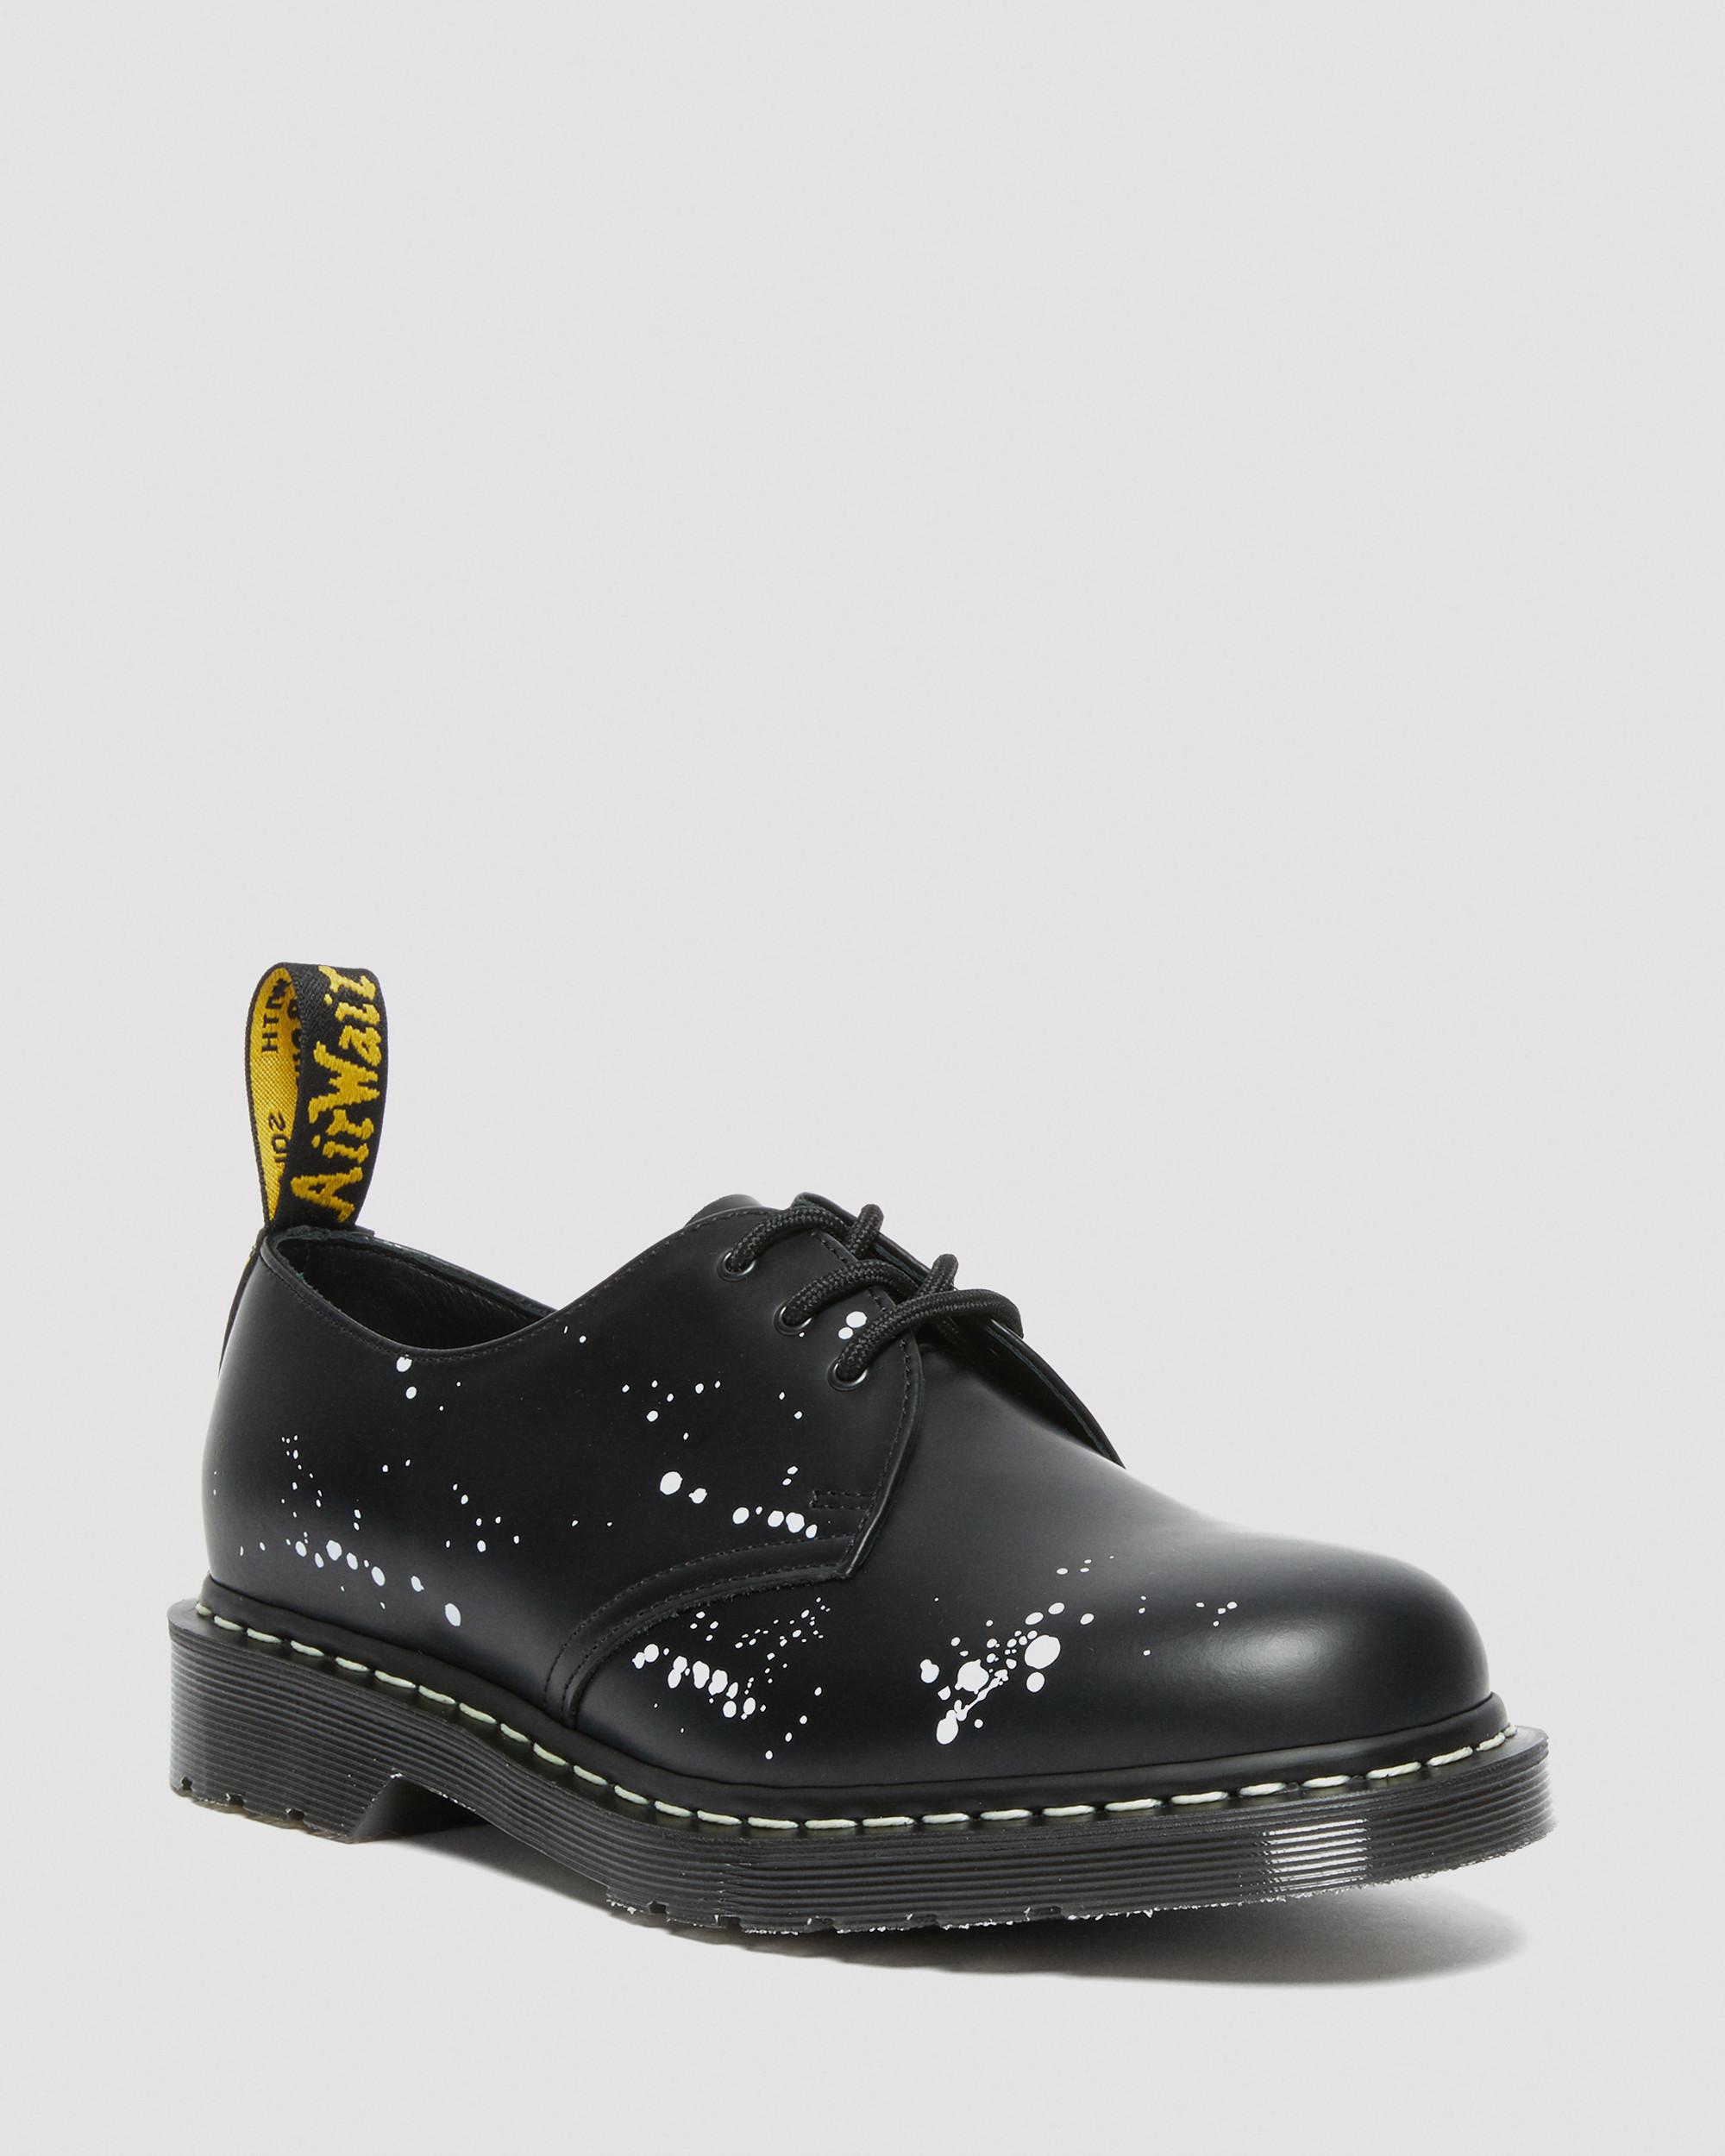 Dr. Martens' 1461 Neighborhood Smooth Leather Oxford Shoes In Black,white,multi